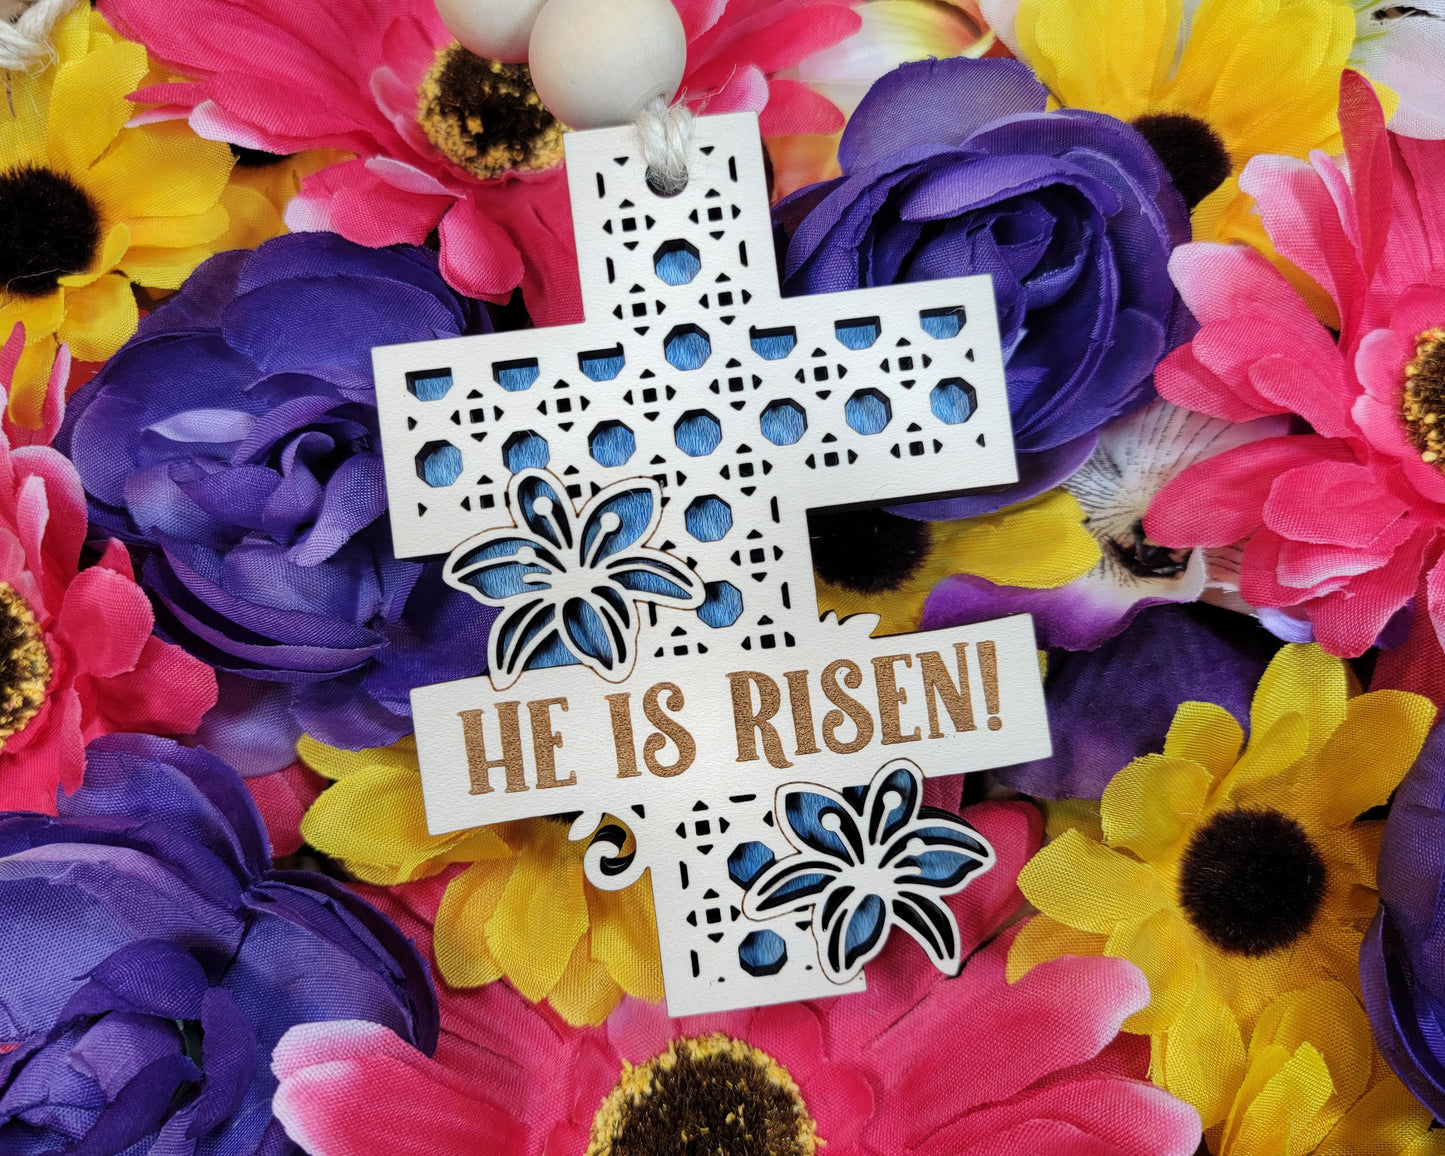 The Little Blessing Easter Tags - 20 Unique designs - SVG, PDF, AI File Download - Glowforge Tested